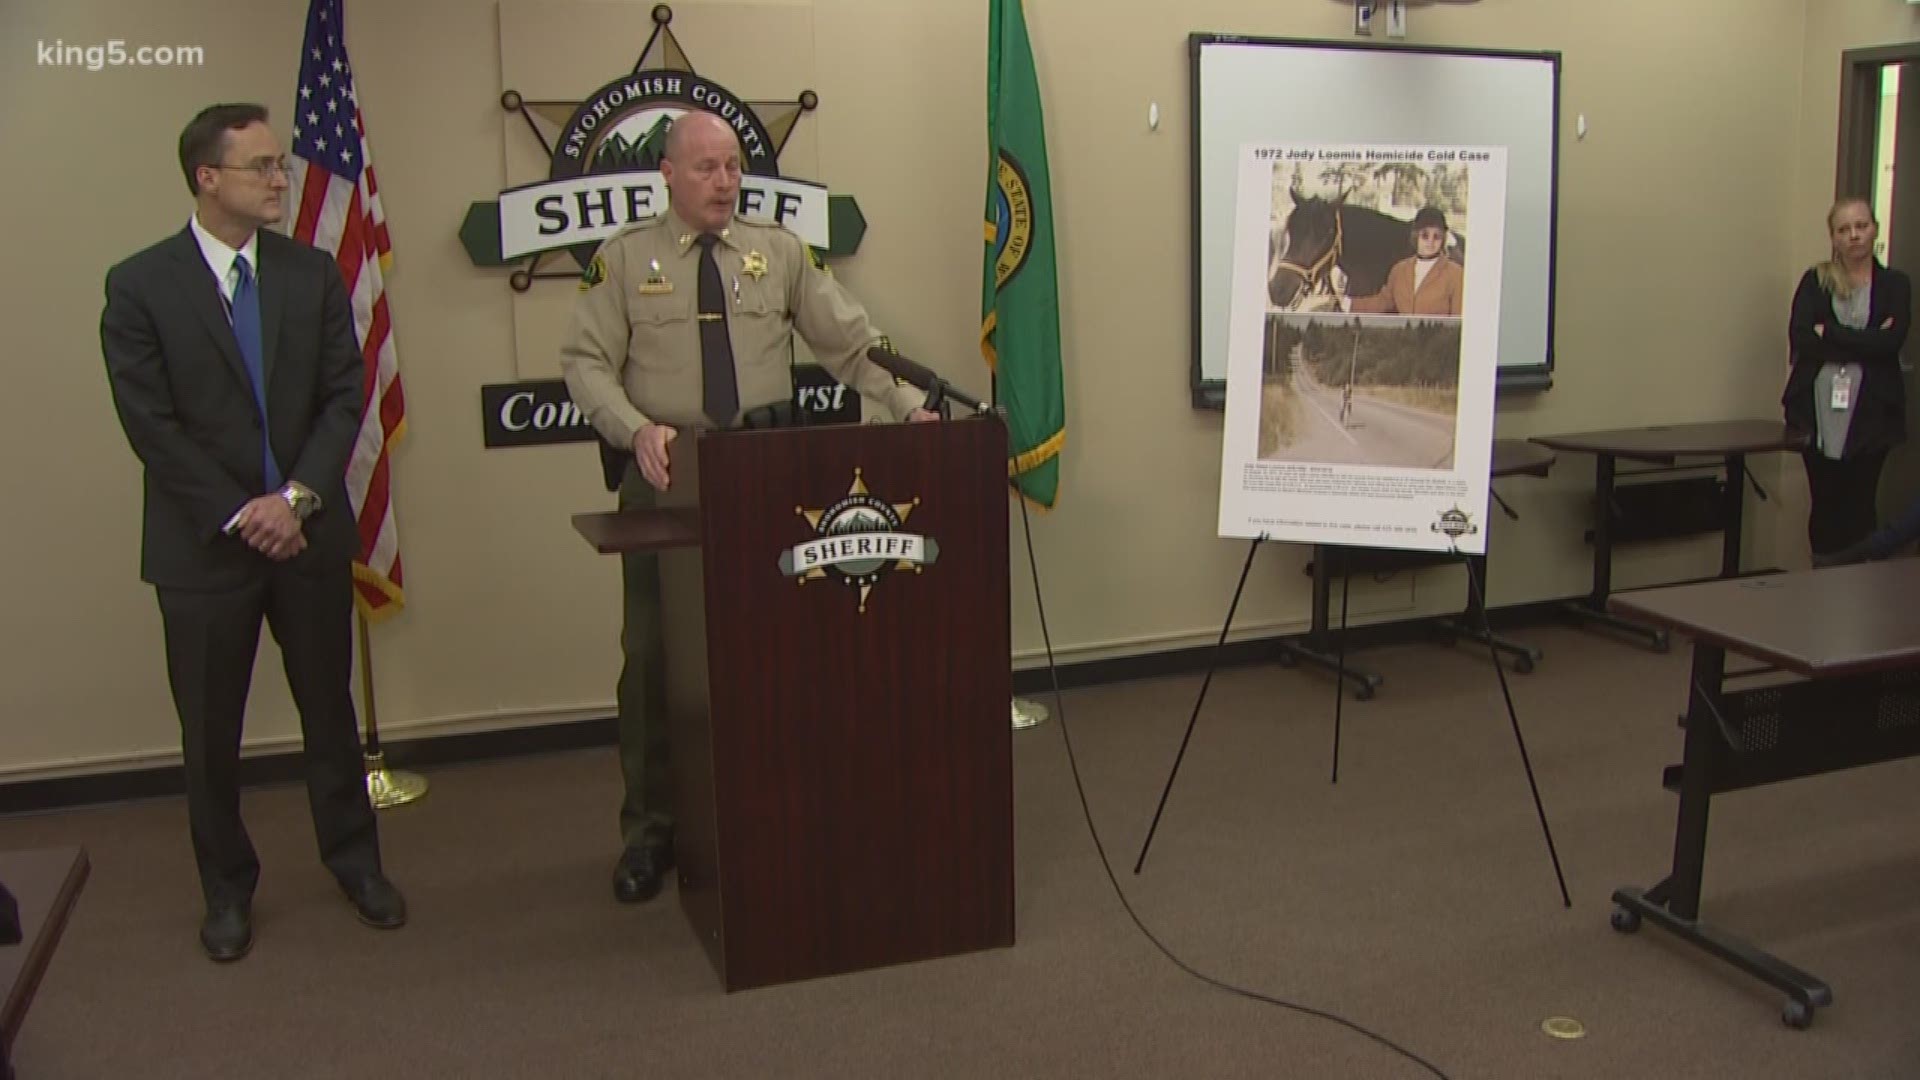 Detectives made an arrest in the 1972 murder of 20-year-old Jody Loomis in Snohomish County. DNA found on a discarded coffee cup cracked open the cold case investigation.